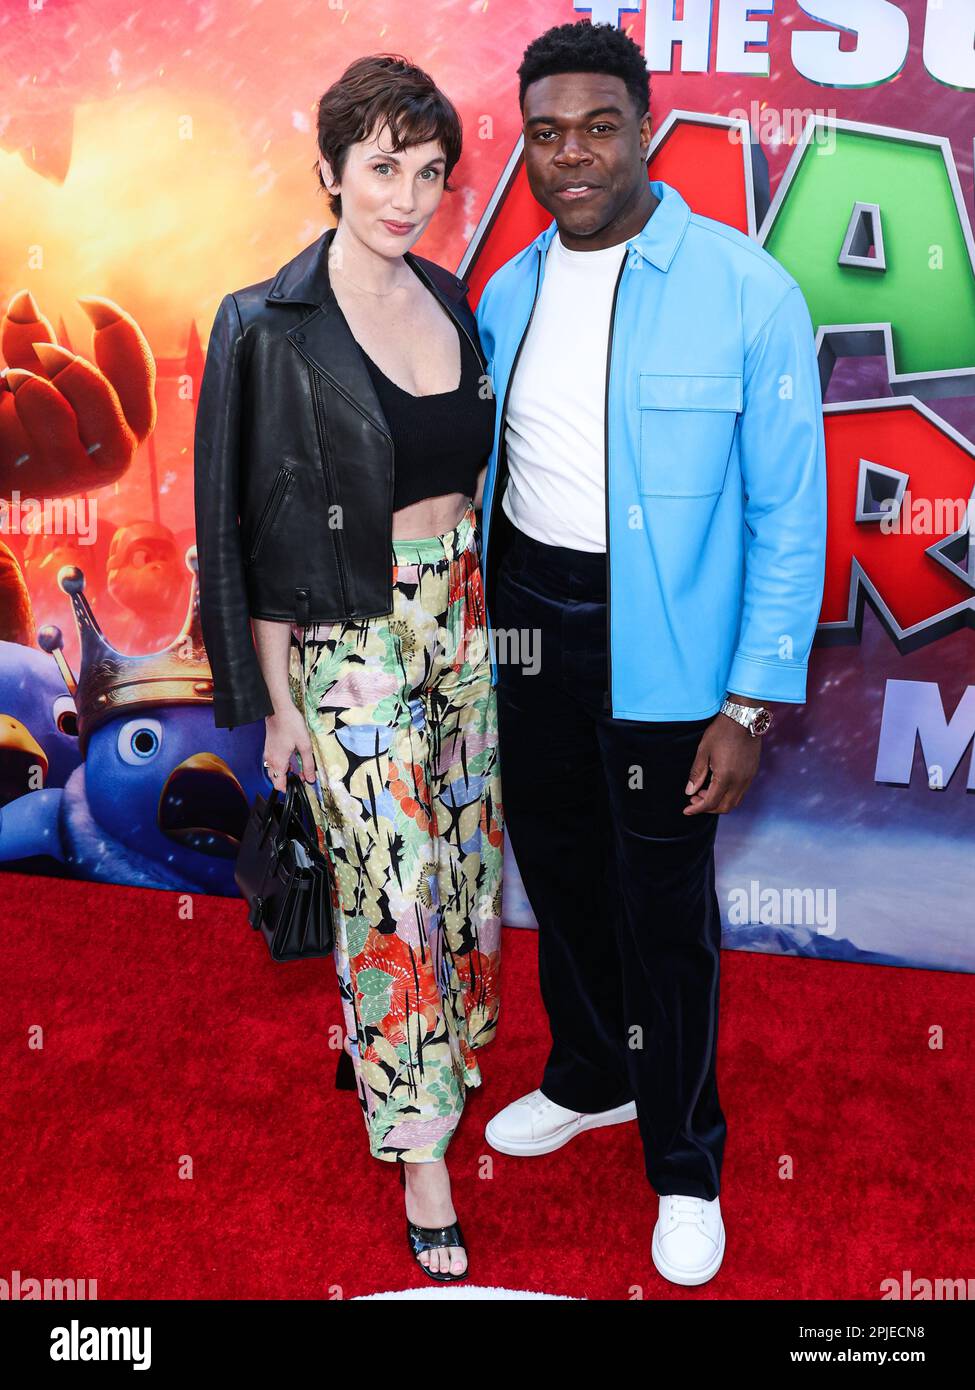 LOS ANGELES, CALIFORNIA, USA - APRIL 01: Nicole Boyd and boyfriend Sam Richardson arrive at the Los Angeles Special Screening Of Universal Pictures, Nintendo And Illumination Entertainment's 'The Super Mario Bros. Movie' held at the Regal Cinemas LA Live & 4DX Movie on April 1, 2023 in Los Angeles, California, United States. (Photo by Xavier Collin/Image Press Agency) Stock Photo